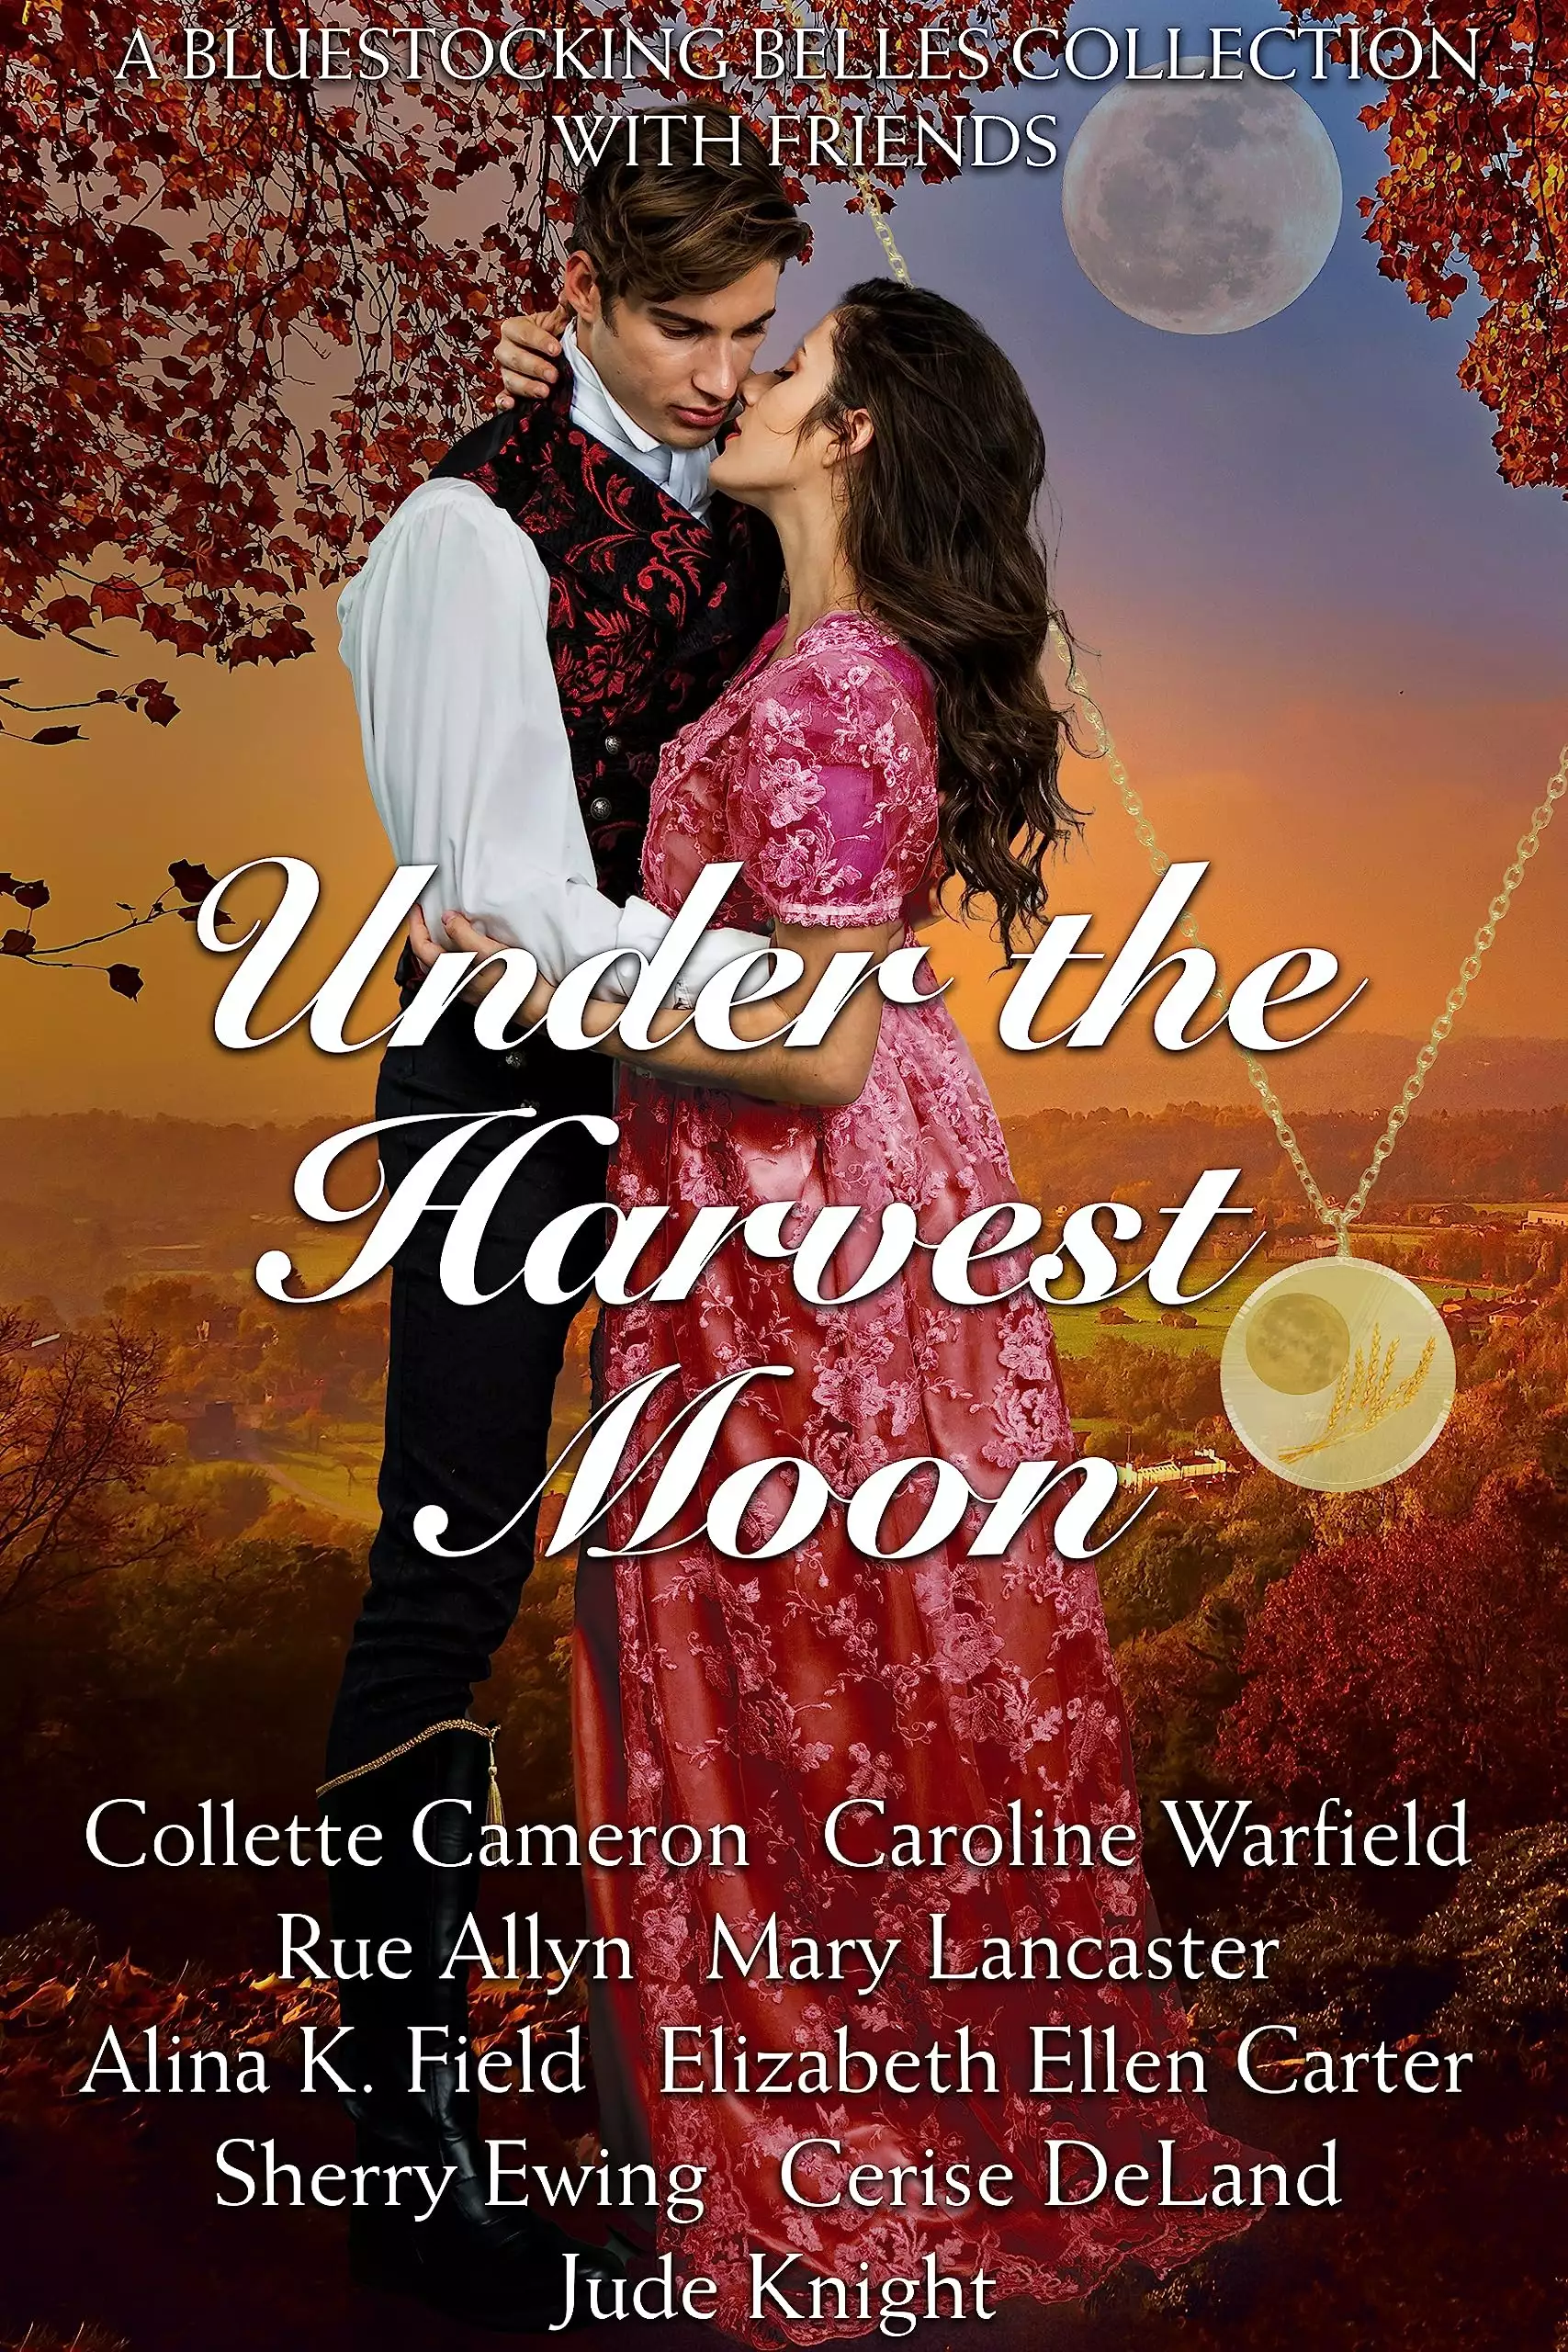 Under the Harvest Moon: A Bluestocking Belles with Friends collection